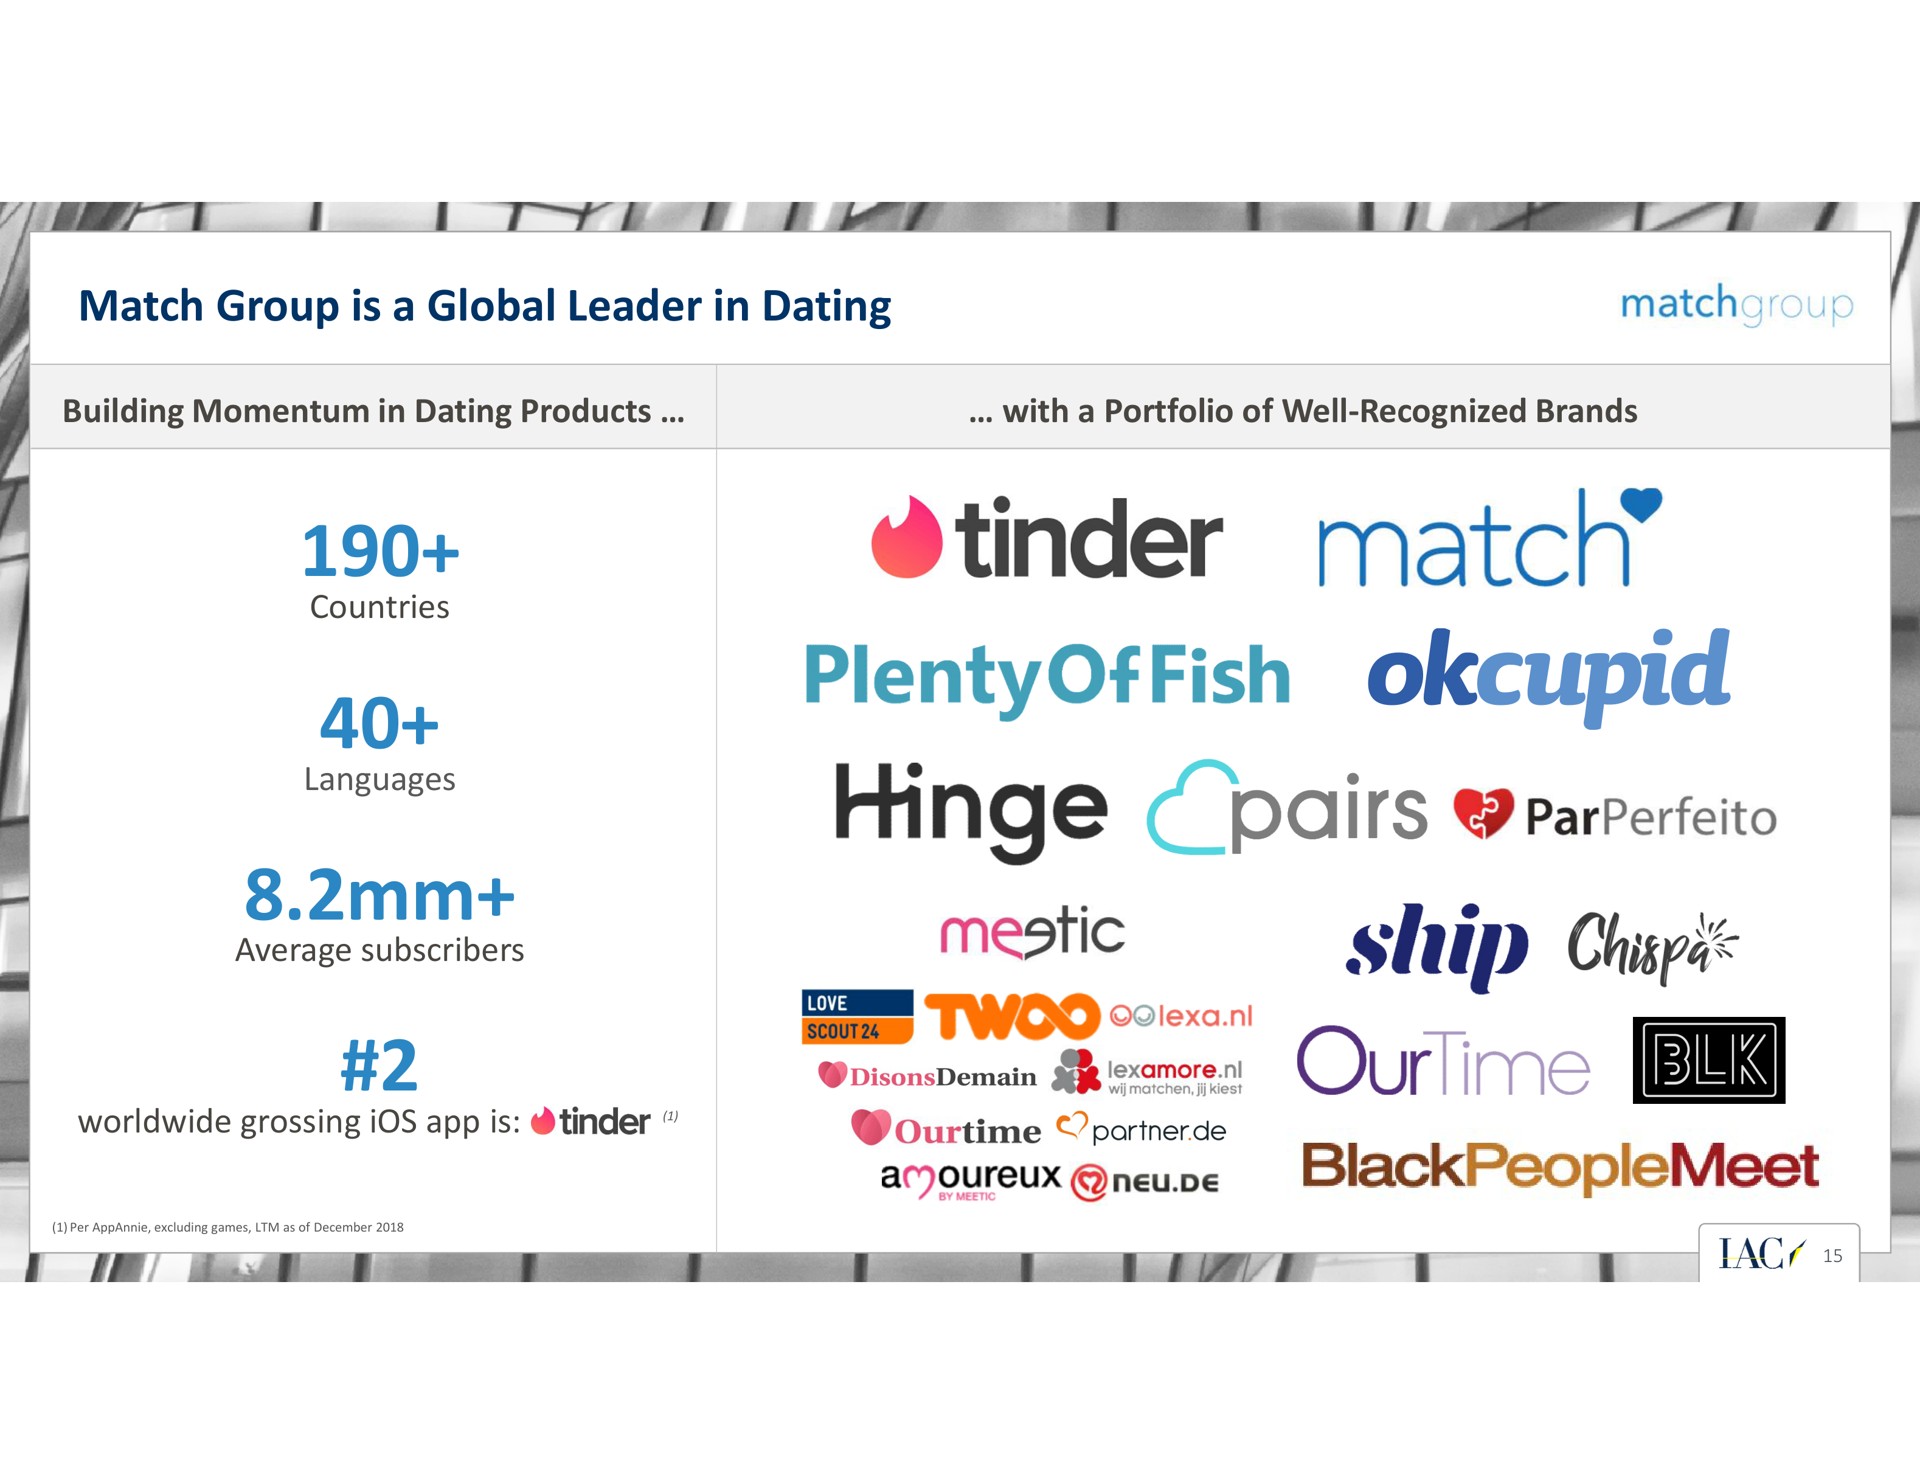 match group is a global leader in dating i tinder our one | IAC